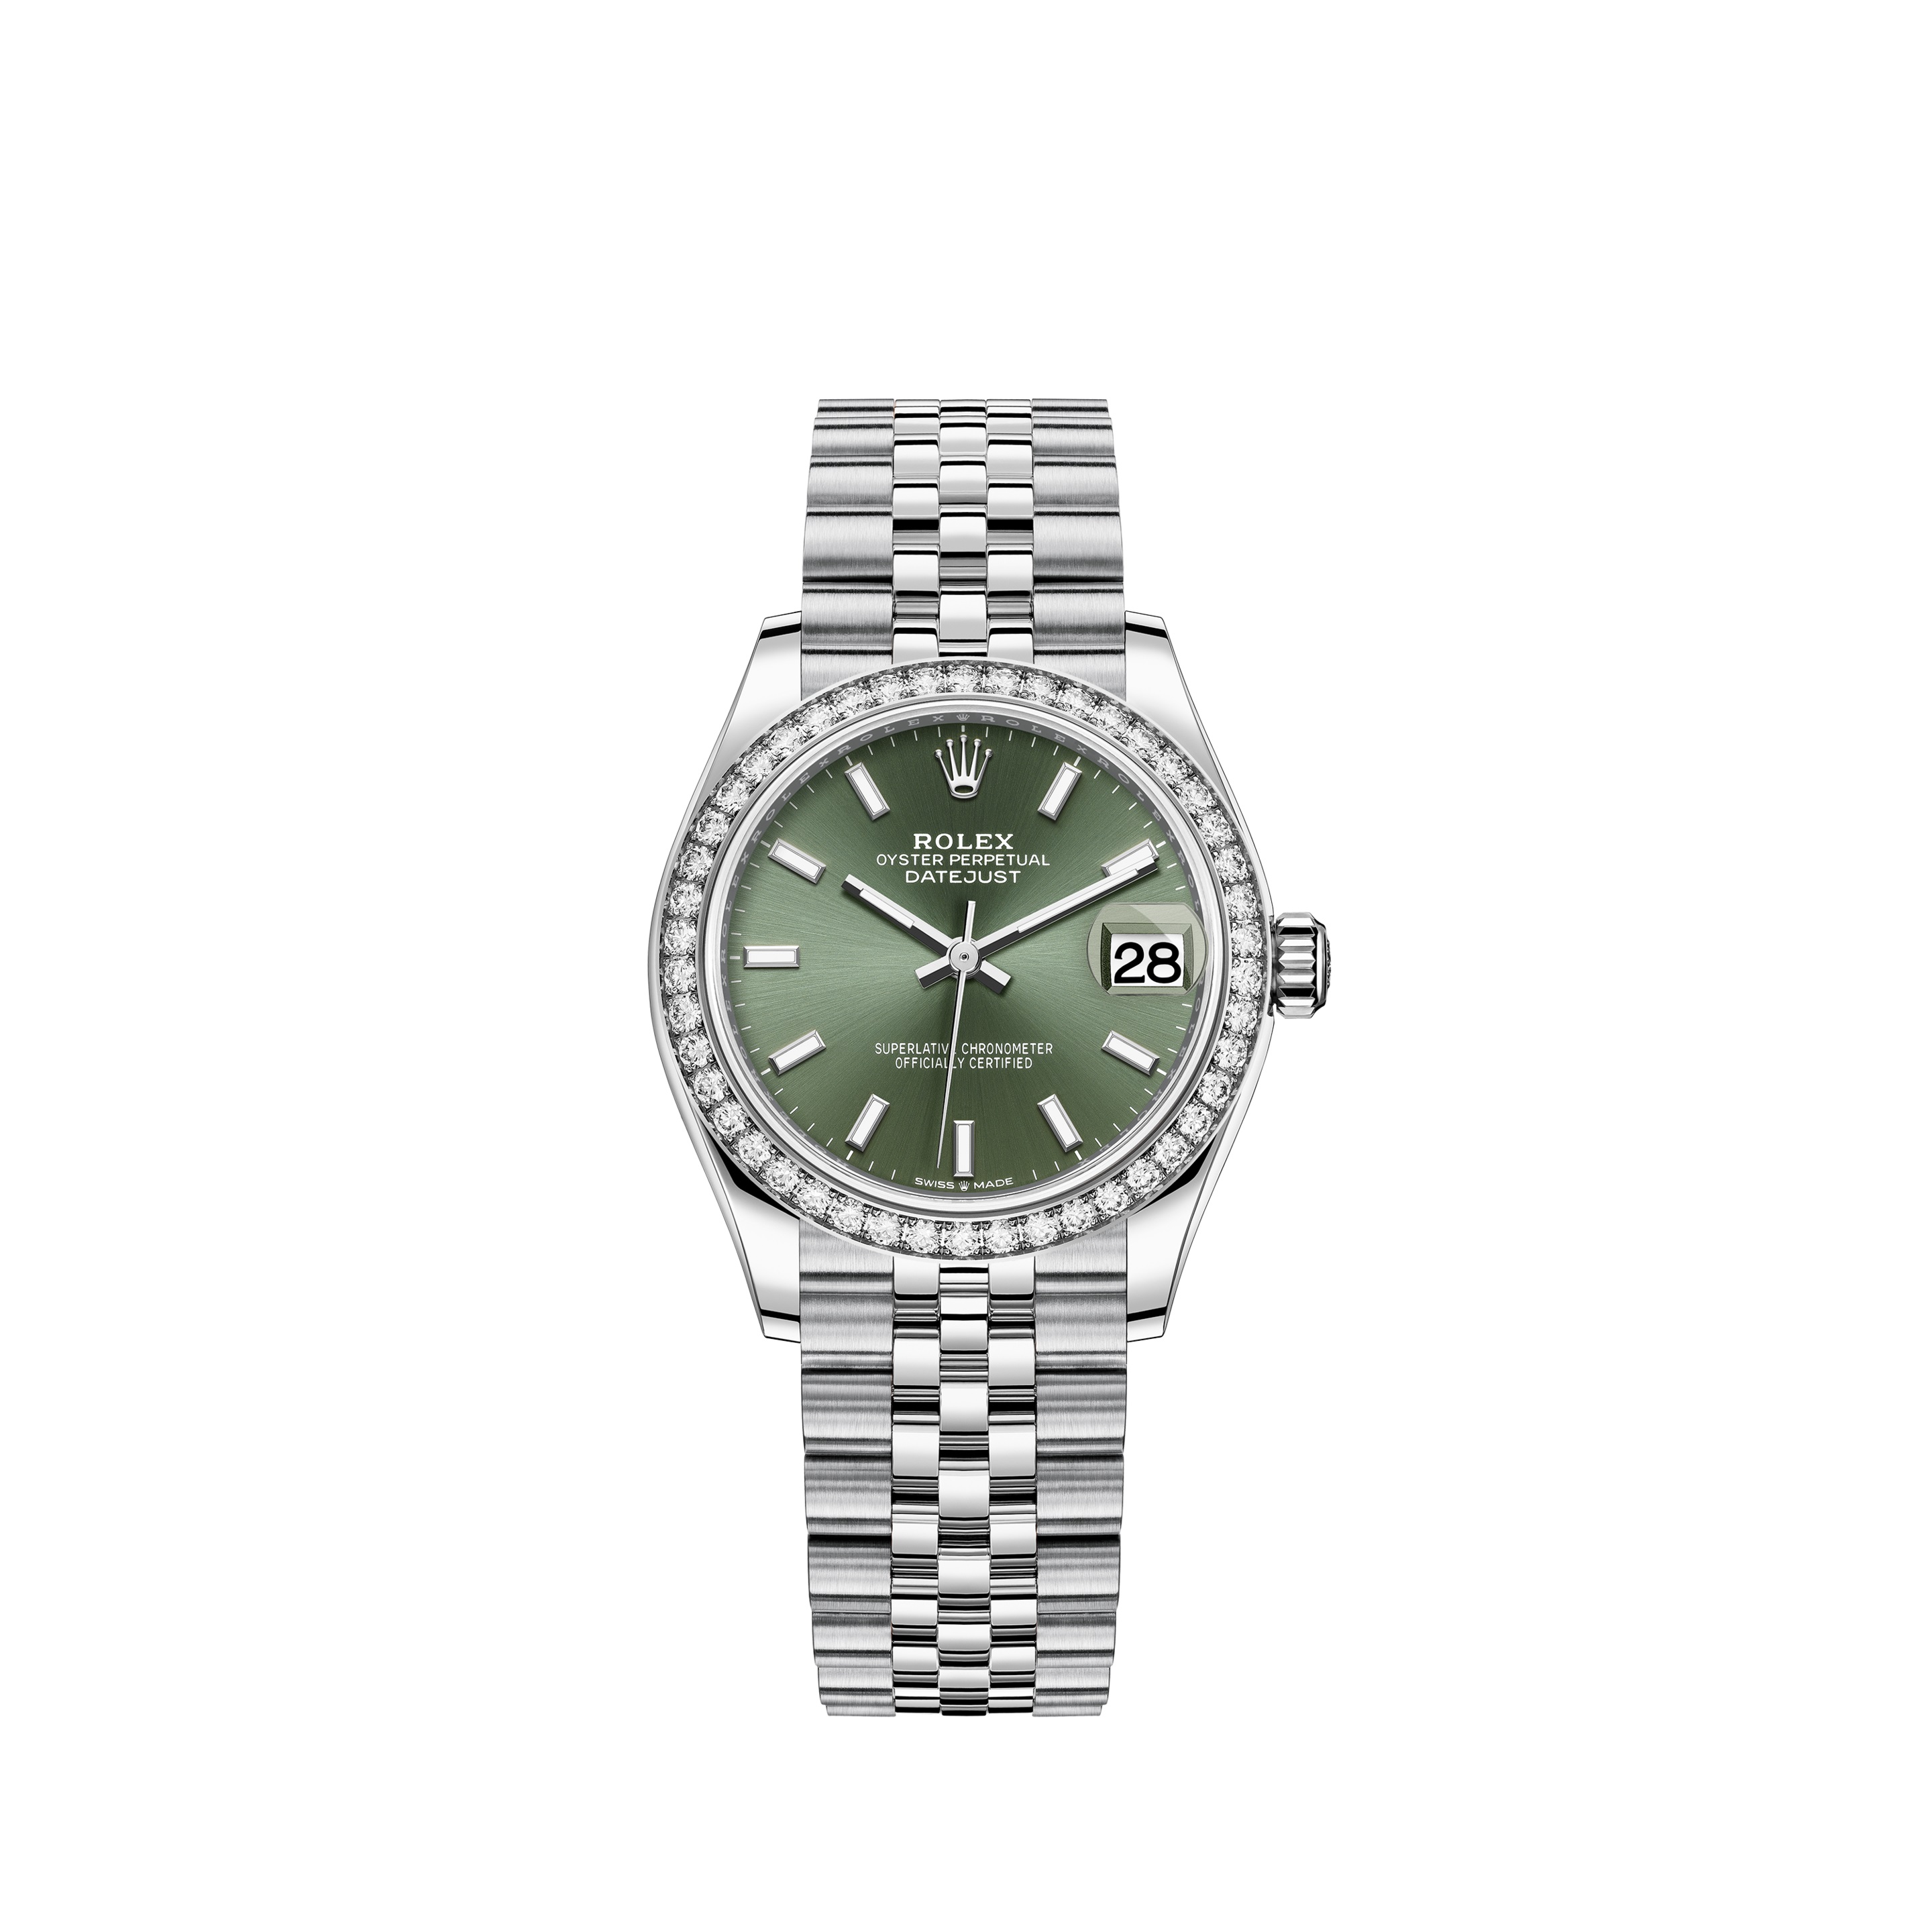 Datejust 31 278384RBR White Gold & Stainless Steel Watch (Mint Green)